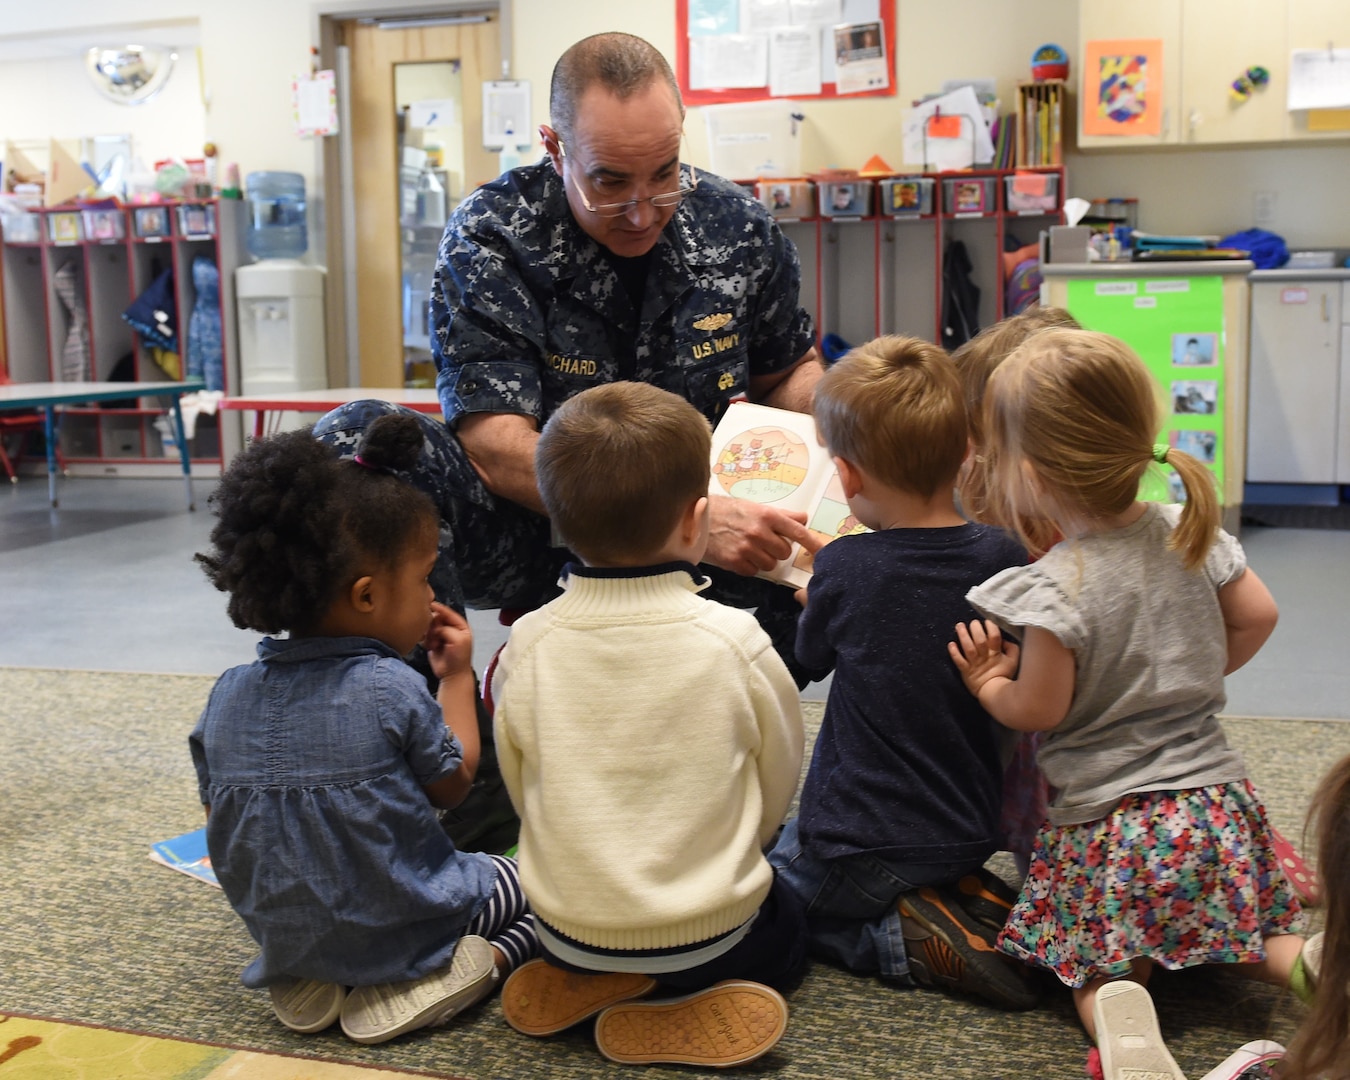 U.S. Navy Vice Adm. Charles Richard, deputy commander of U.S. Strategic Command (USSTRATCOM), reads to children during a visit to Child Development Center (CDC) II at Offutt Air Force Base, Neb., April 26, 2018. Richard and other USSTRATCOM senior leaders read to children at the CDC in honor of Month of the Military Child, designated in April as a time to honor the sacrifices of the more than 1.7 million children of military members serving globally.